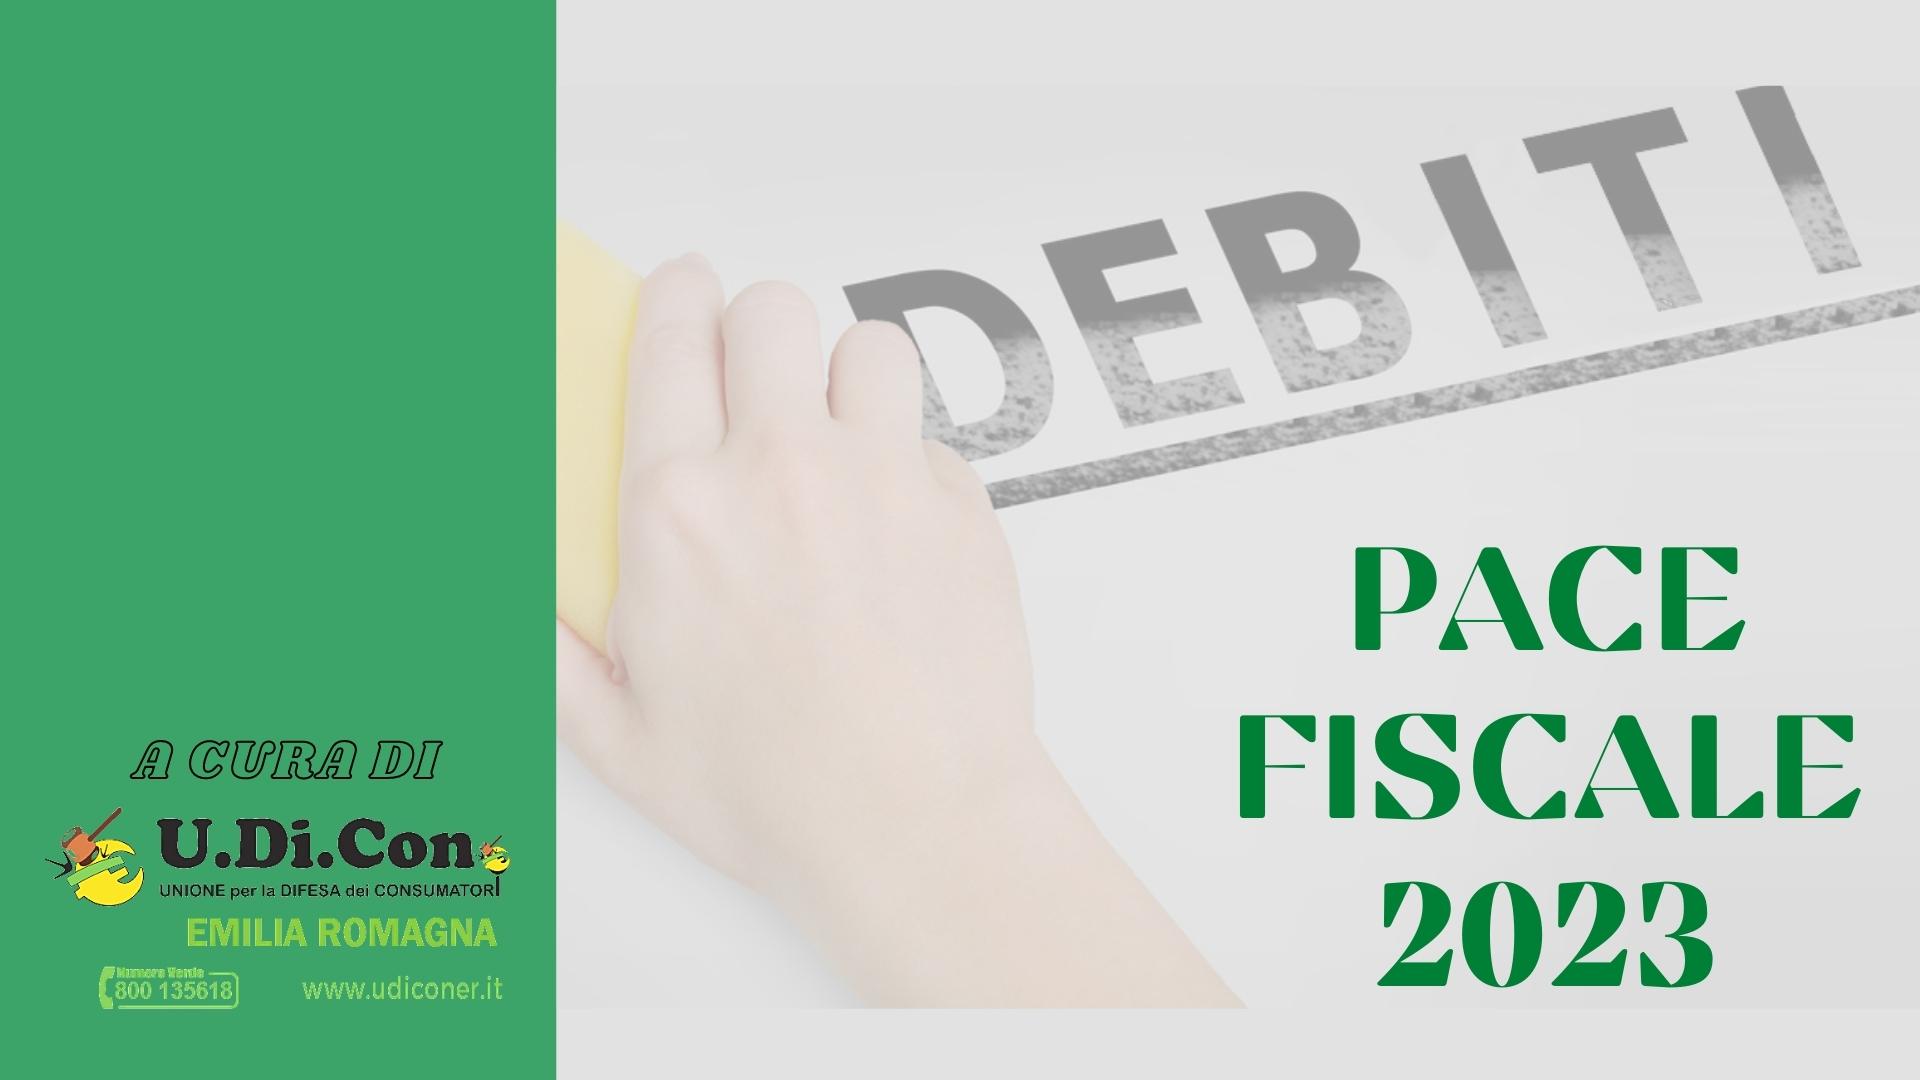 PACE FISCALE 2023